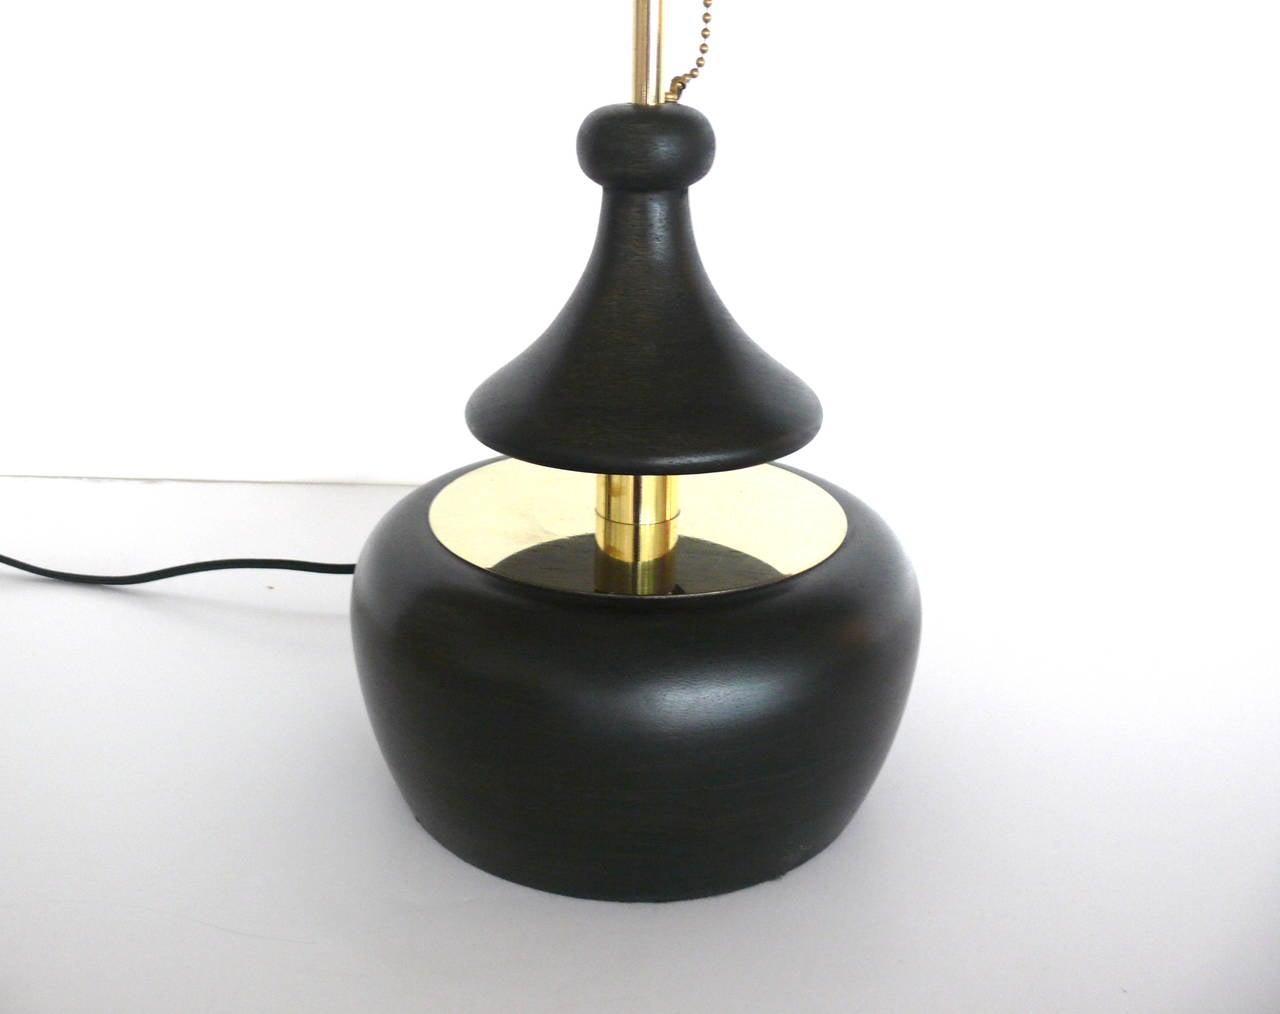 Beautiful pair of solid walnut table lamps refinished in a dark ebony with brass detailing. Floating wood platform with pull chain on stem allows for a push on or push off light. Professionally rewired. Perfect and functional for bedside!